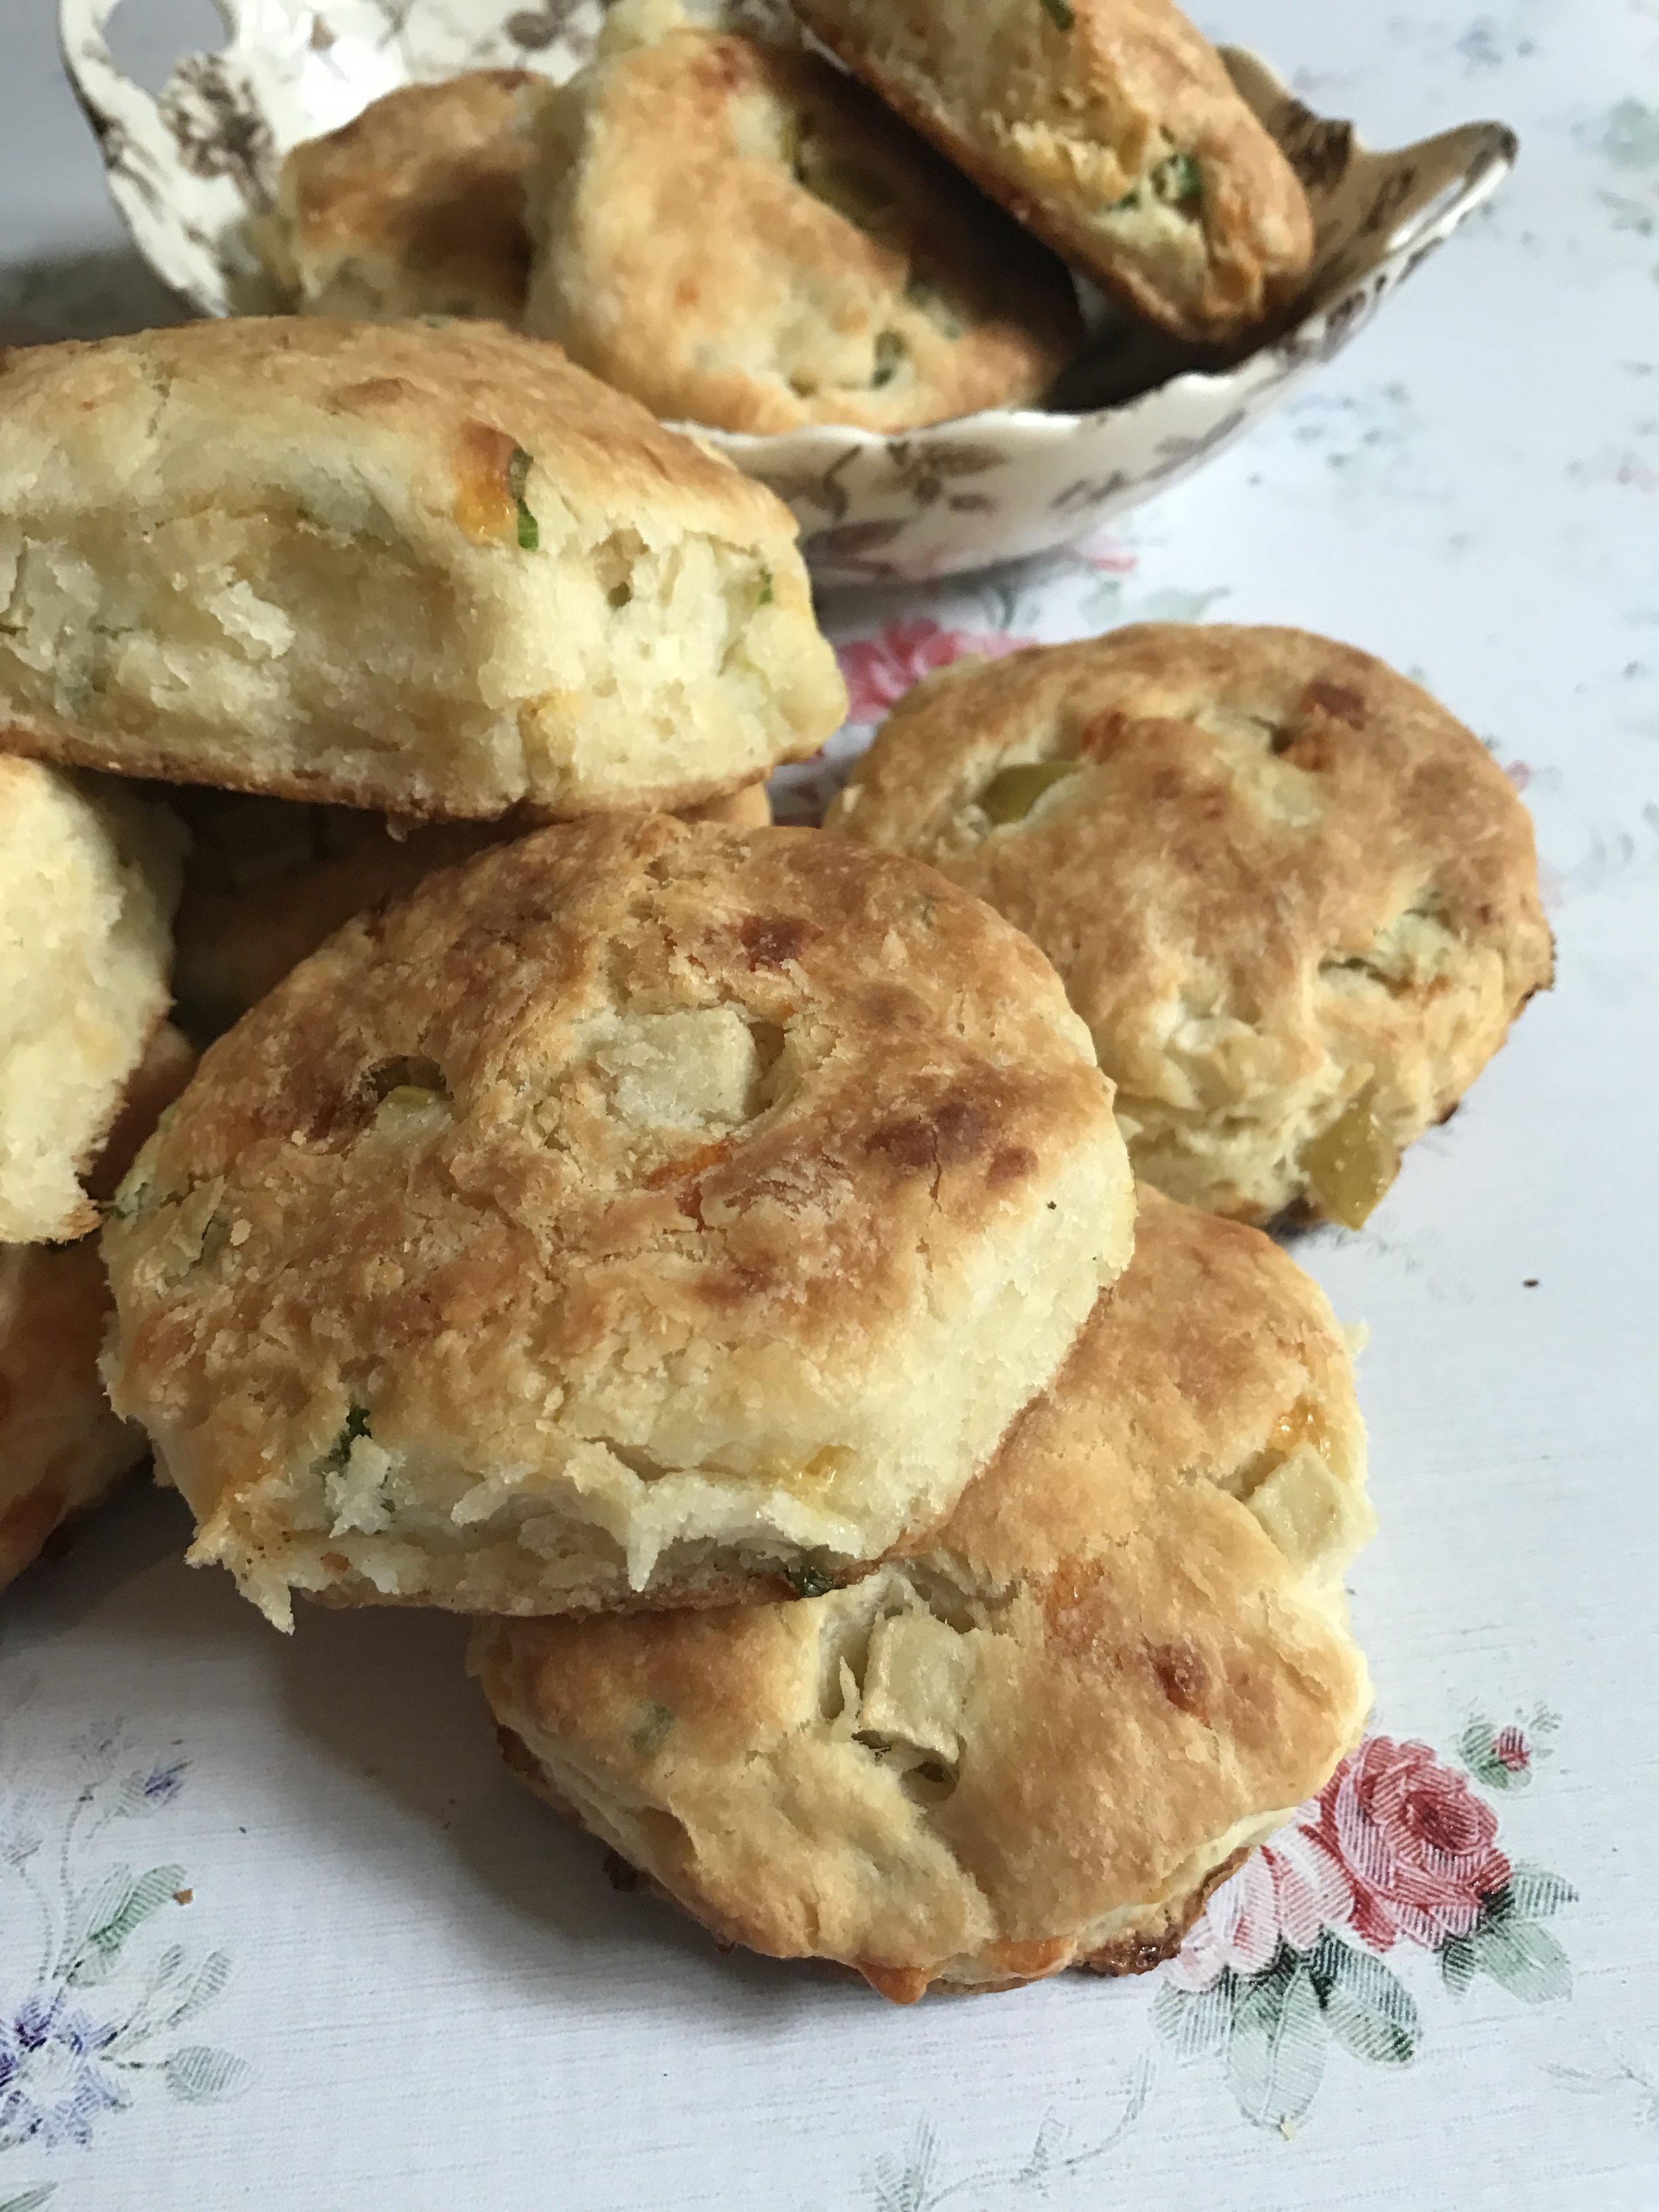 Green Apple, Smoked Cheddar and Chives Biscuits 5.jpg